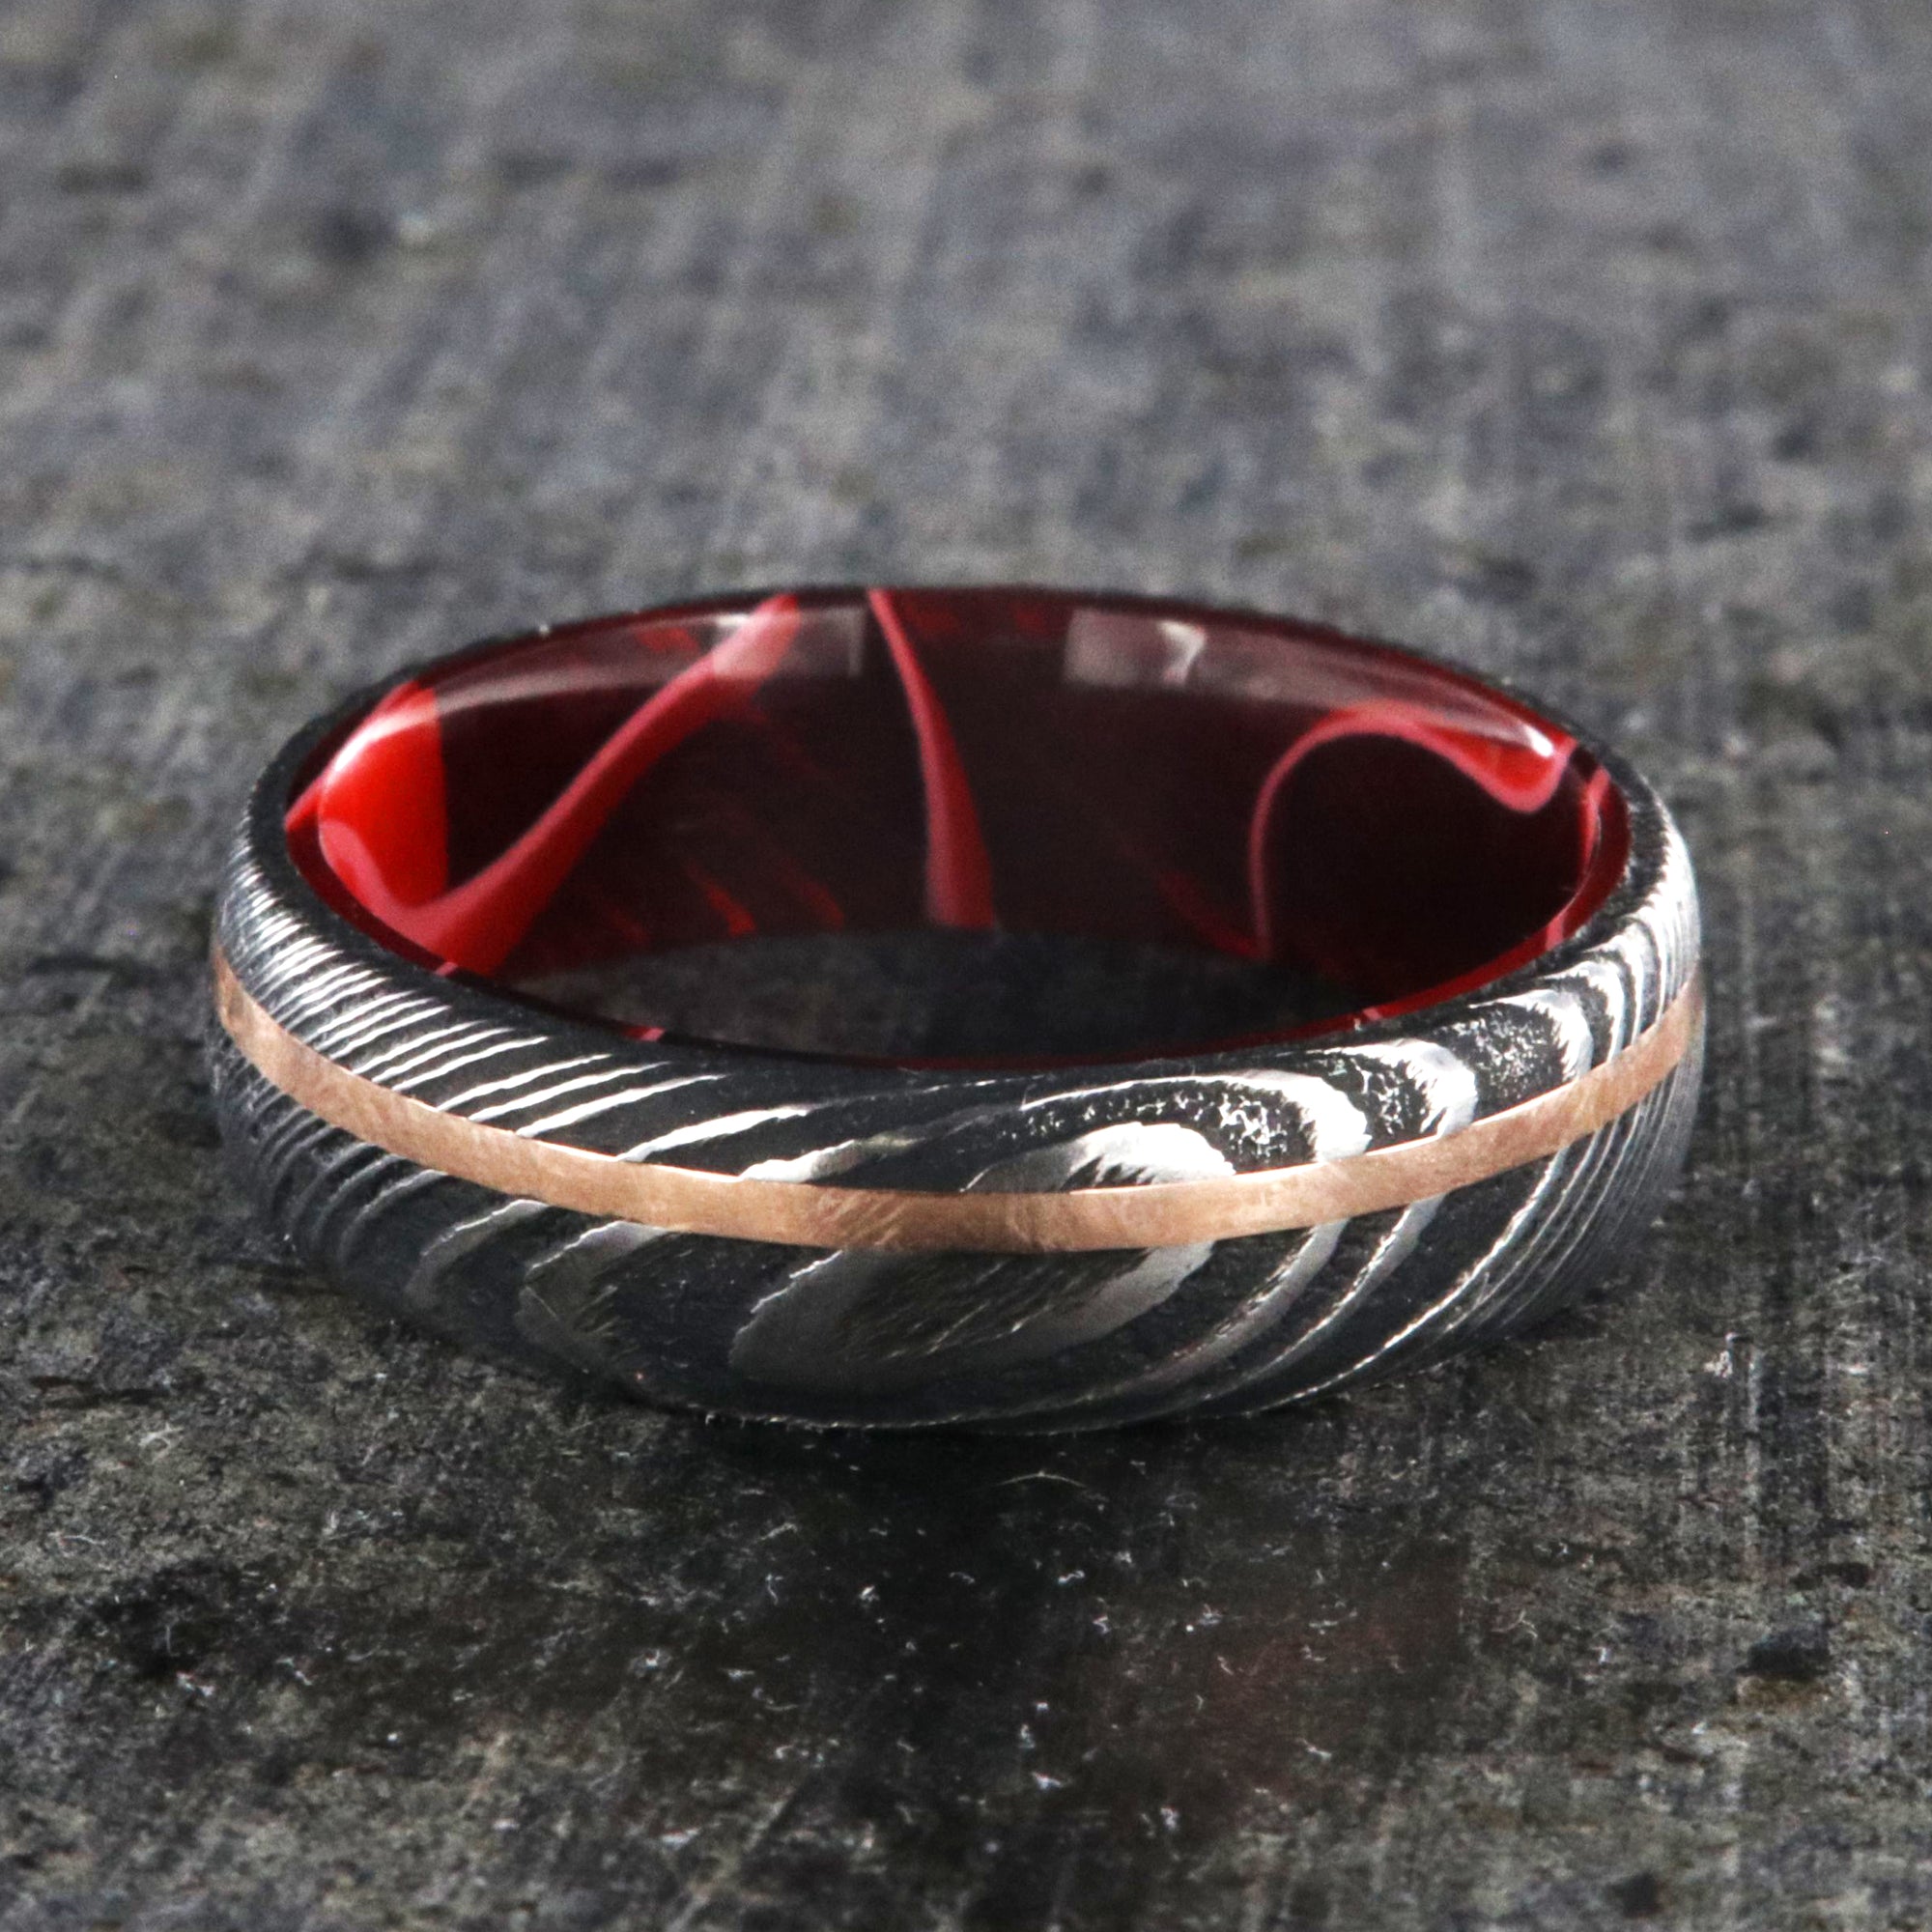 6mm wide black Damascus steel ring with a thin off-centered rose gold inlay and dark and bright red swirled acrylic sleeve